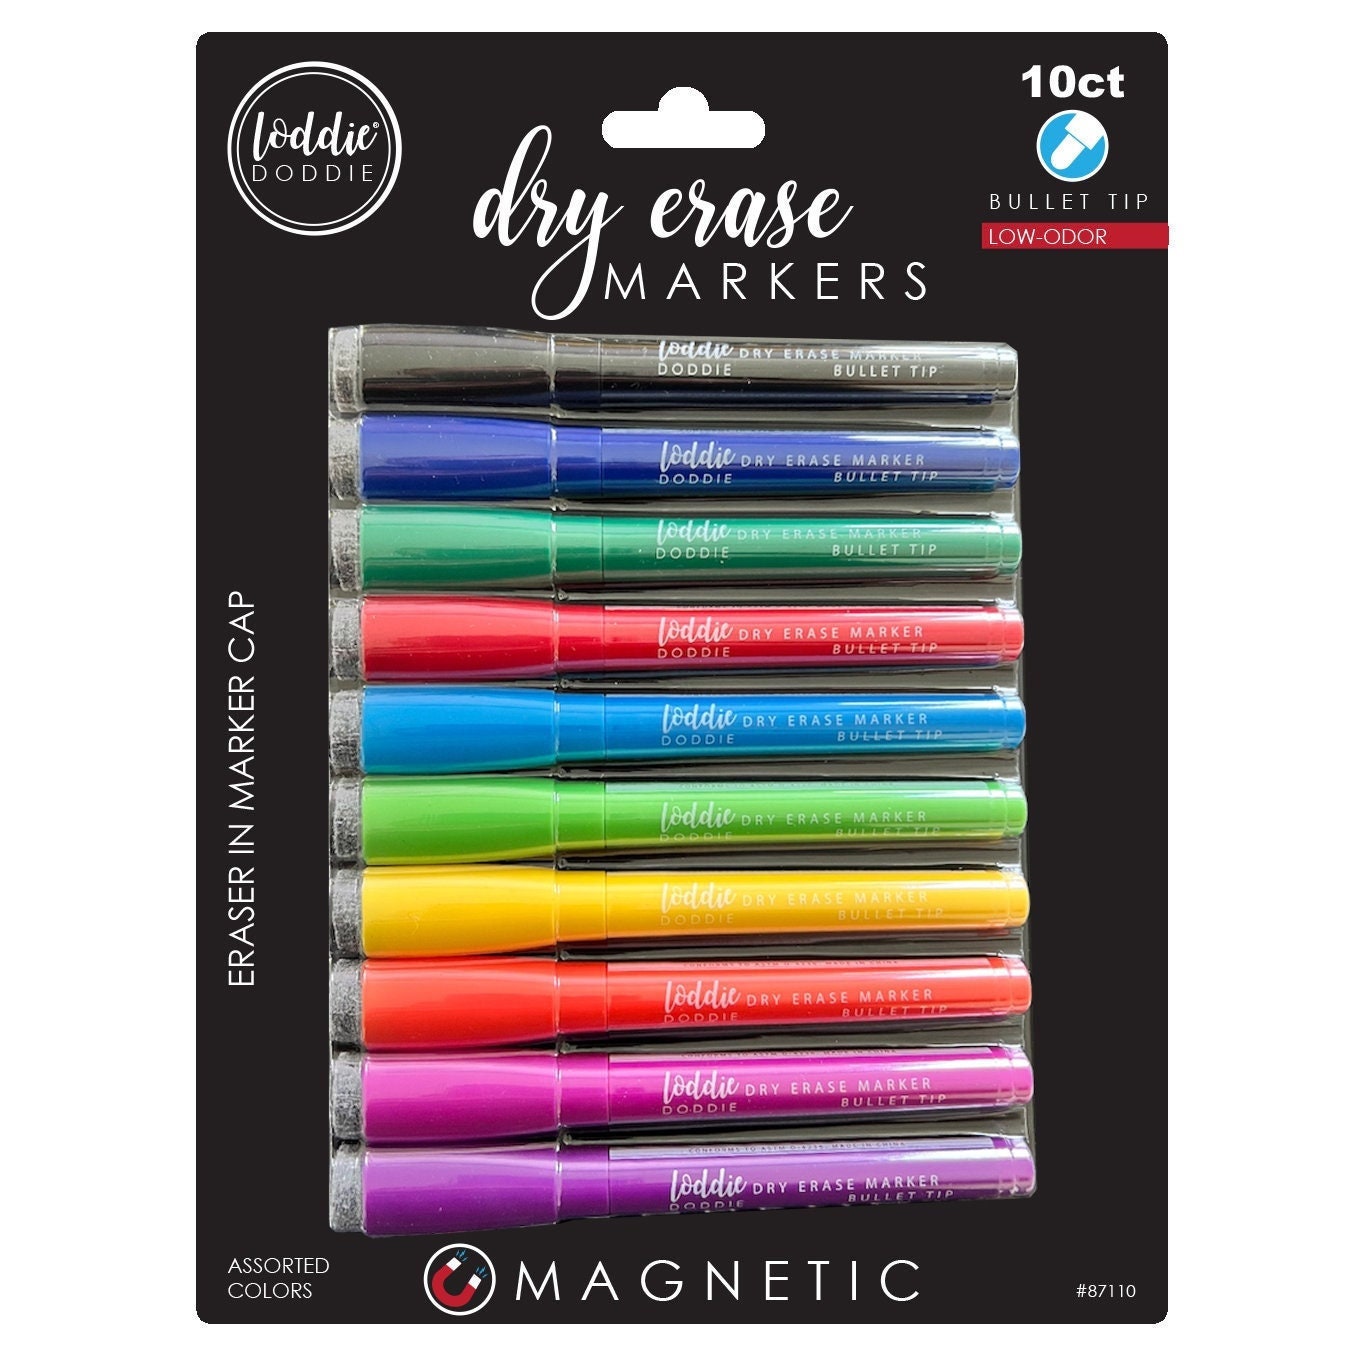 Le Pen Flex Set Jewel Colors 6 Pack Markers Smear Resistant Markers  Non-toxic Markers 6 Pc Assorted Colors Marvy Uchida 